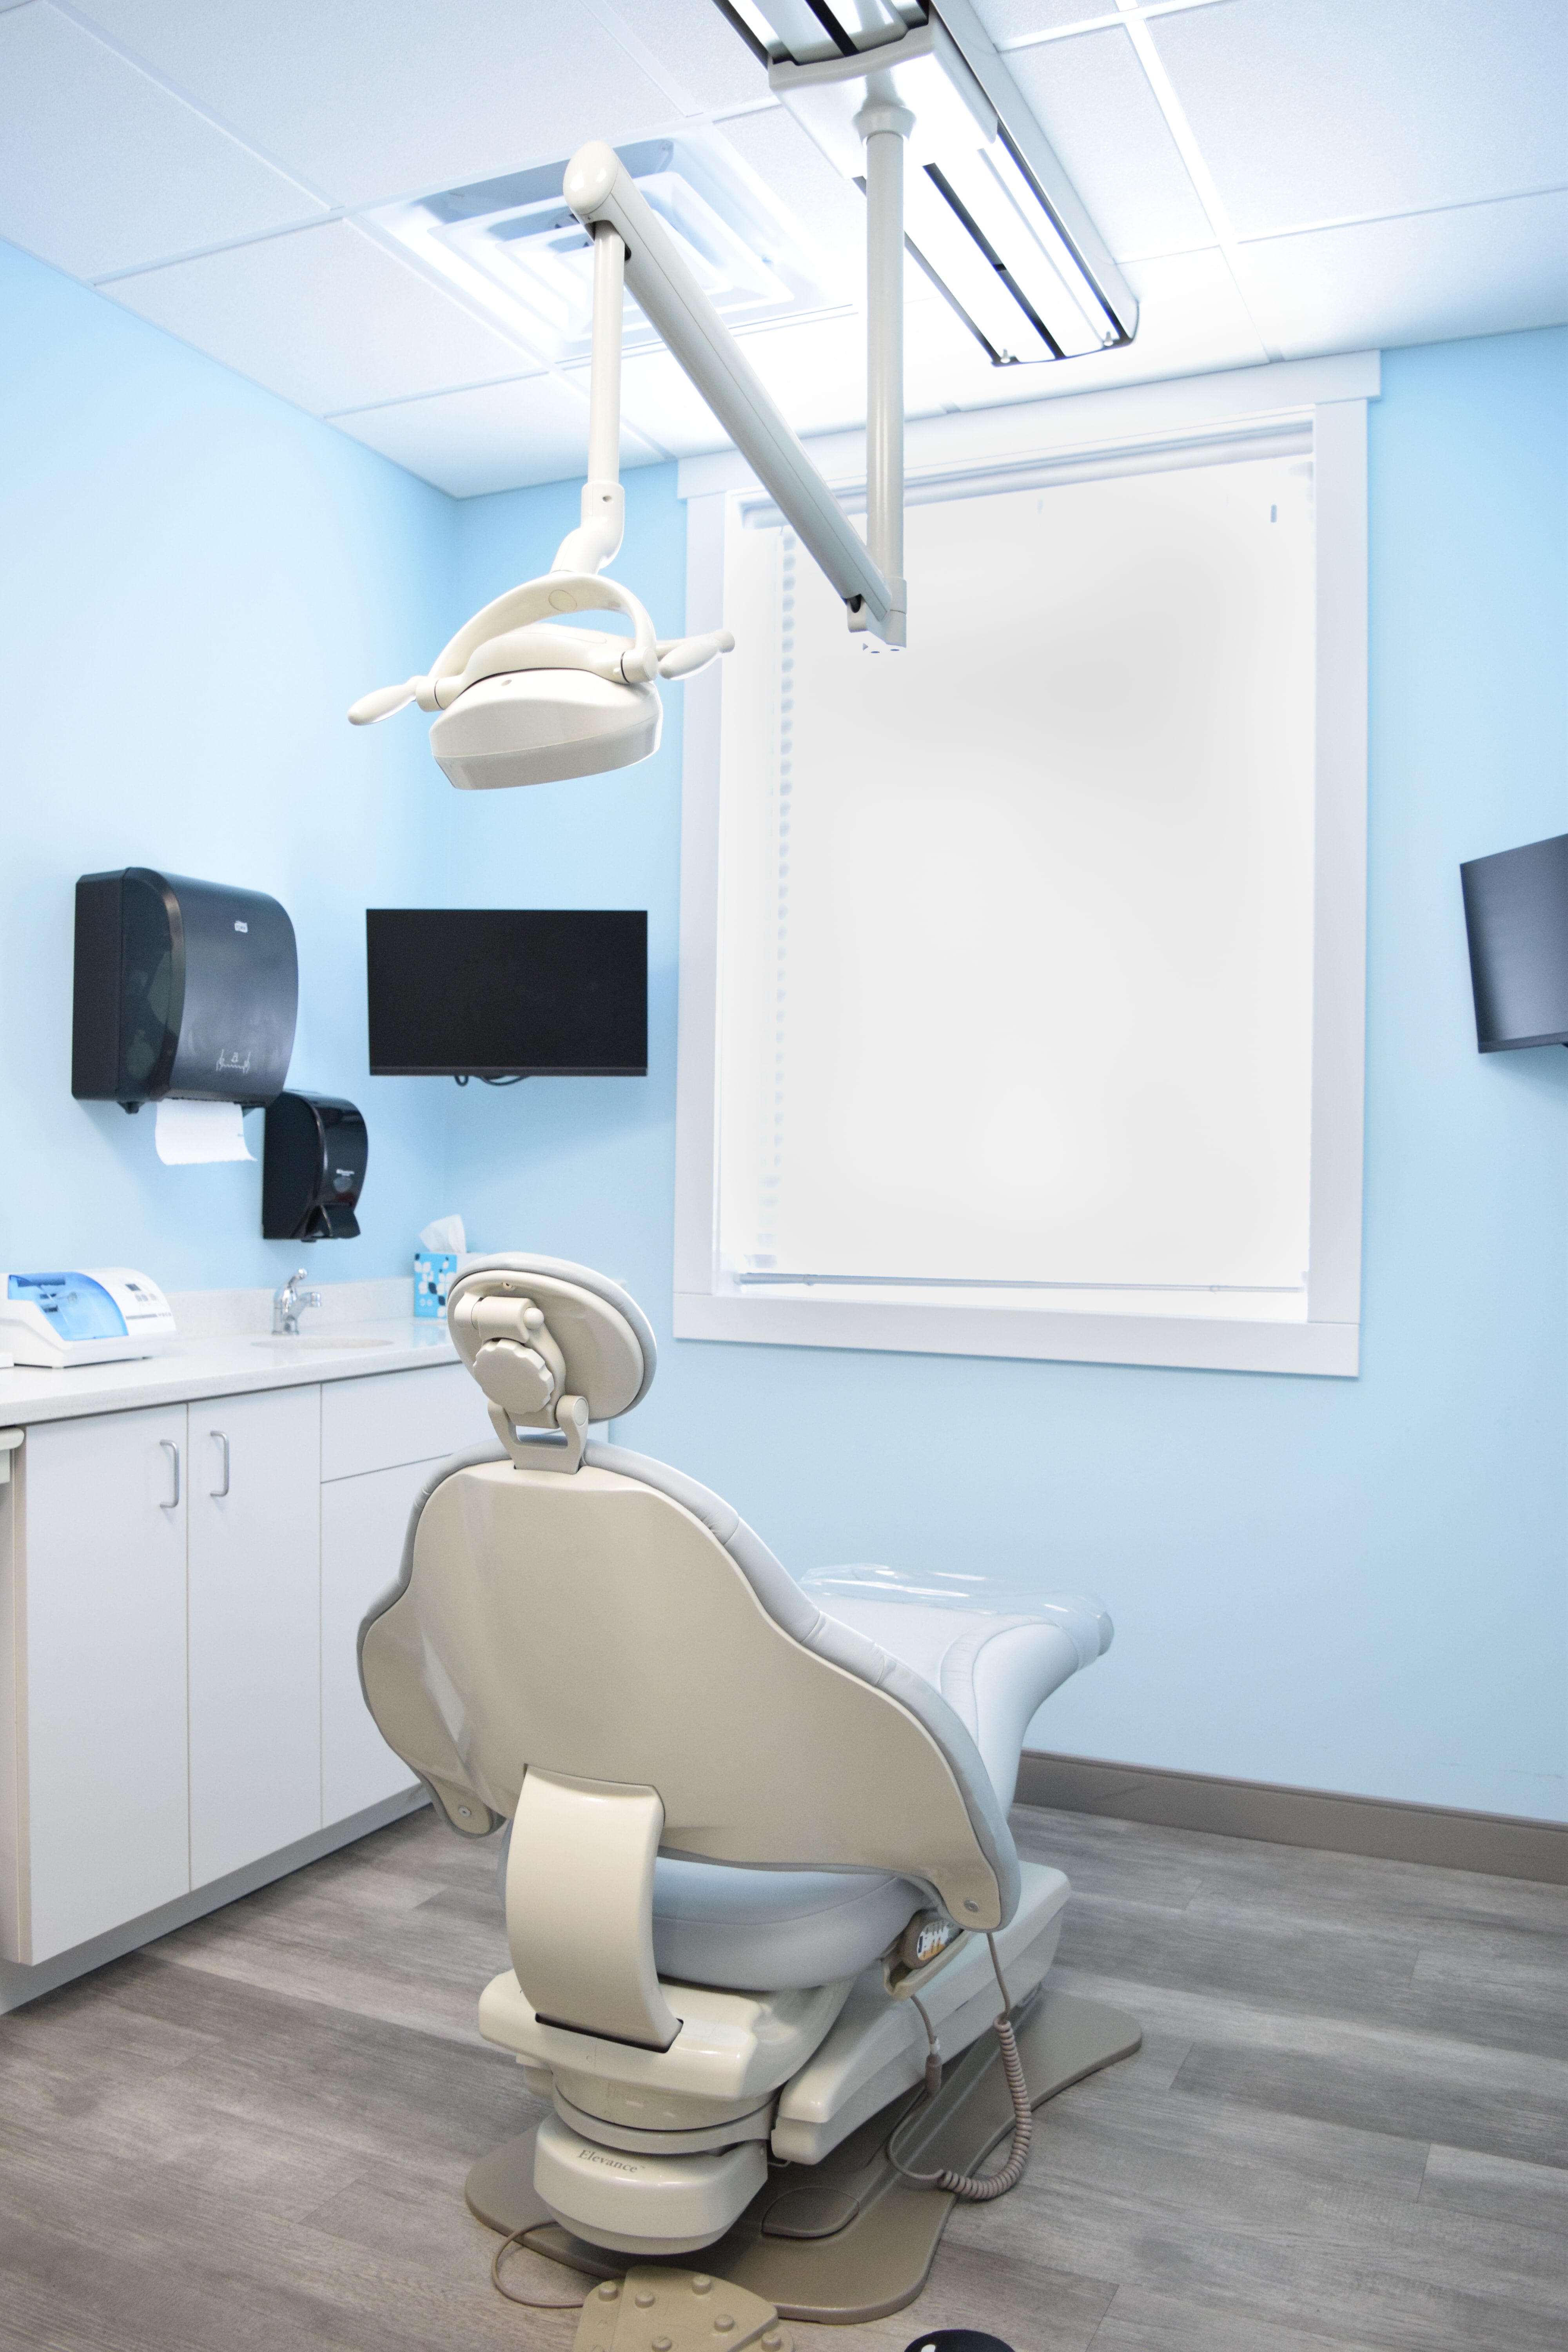 MI Smiles Dental Grand Haven offers the latest in dental technology.